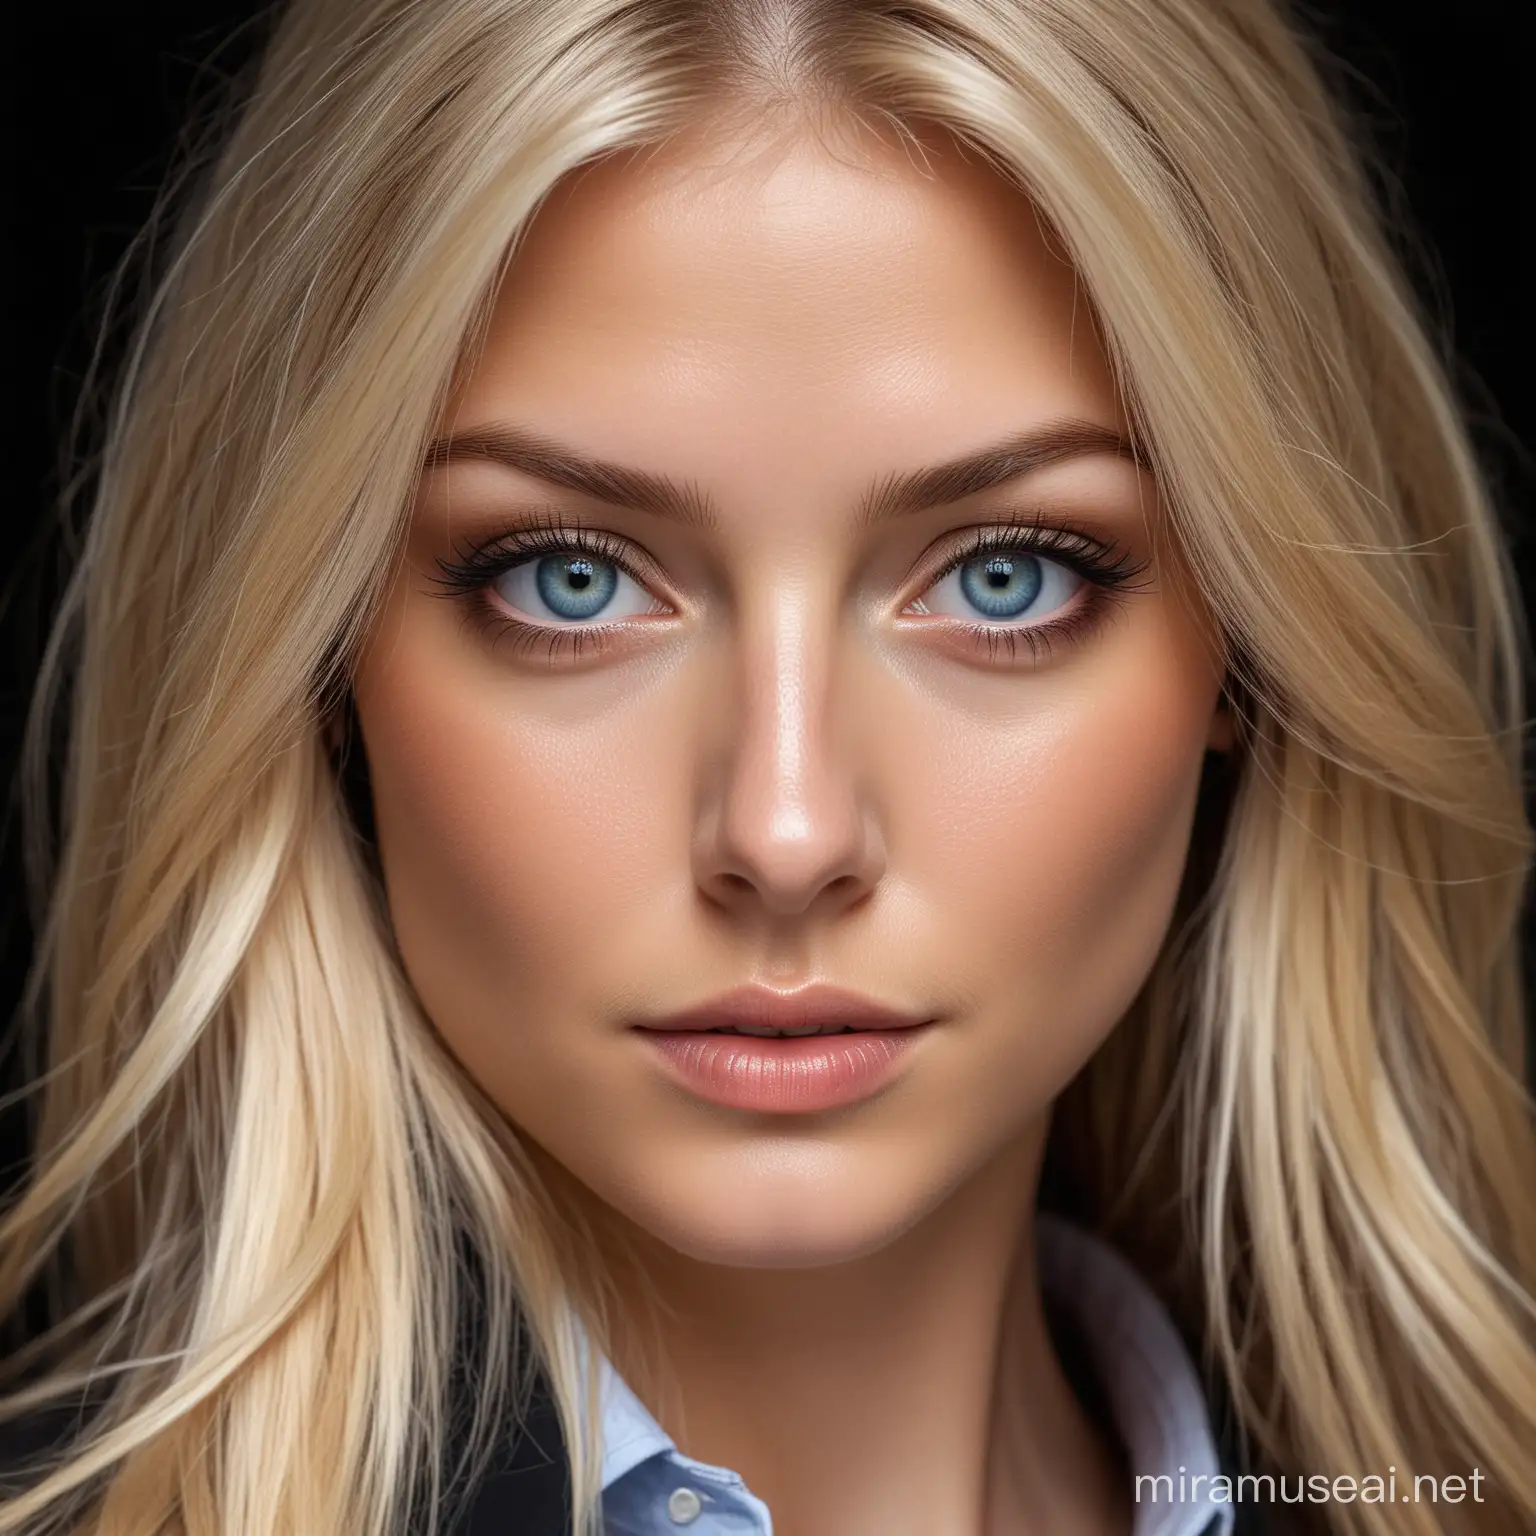 Ultra Real Portrait of a Beautiful Businesswoman with Blue Eyes and Blonde Hair in Dark Setting